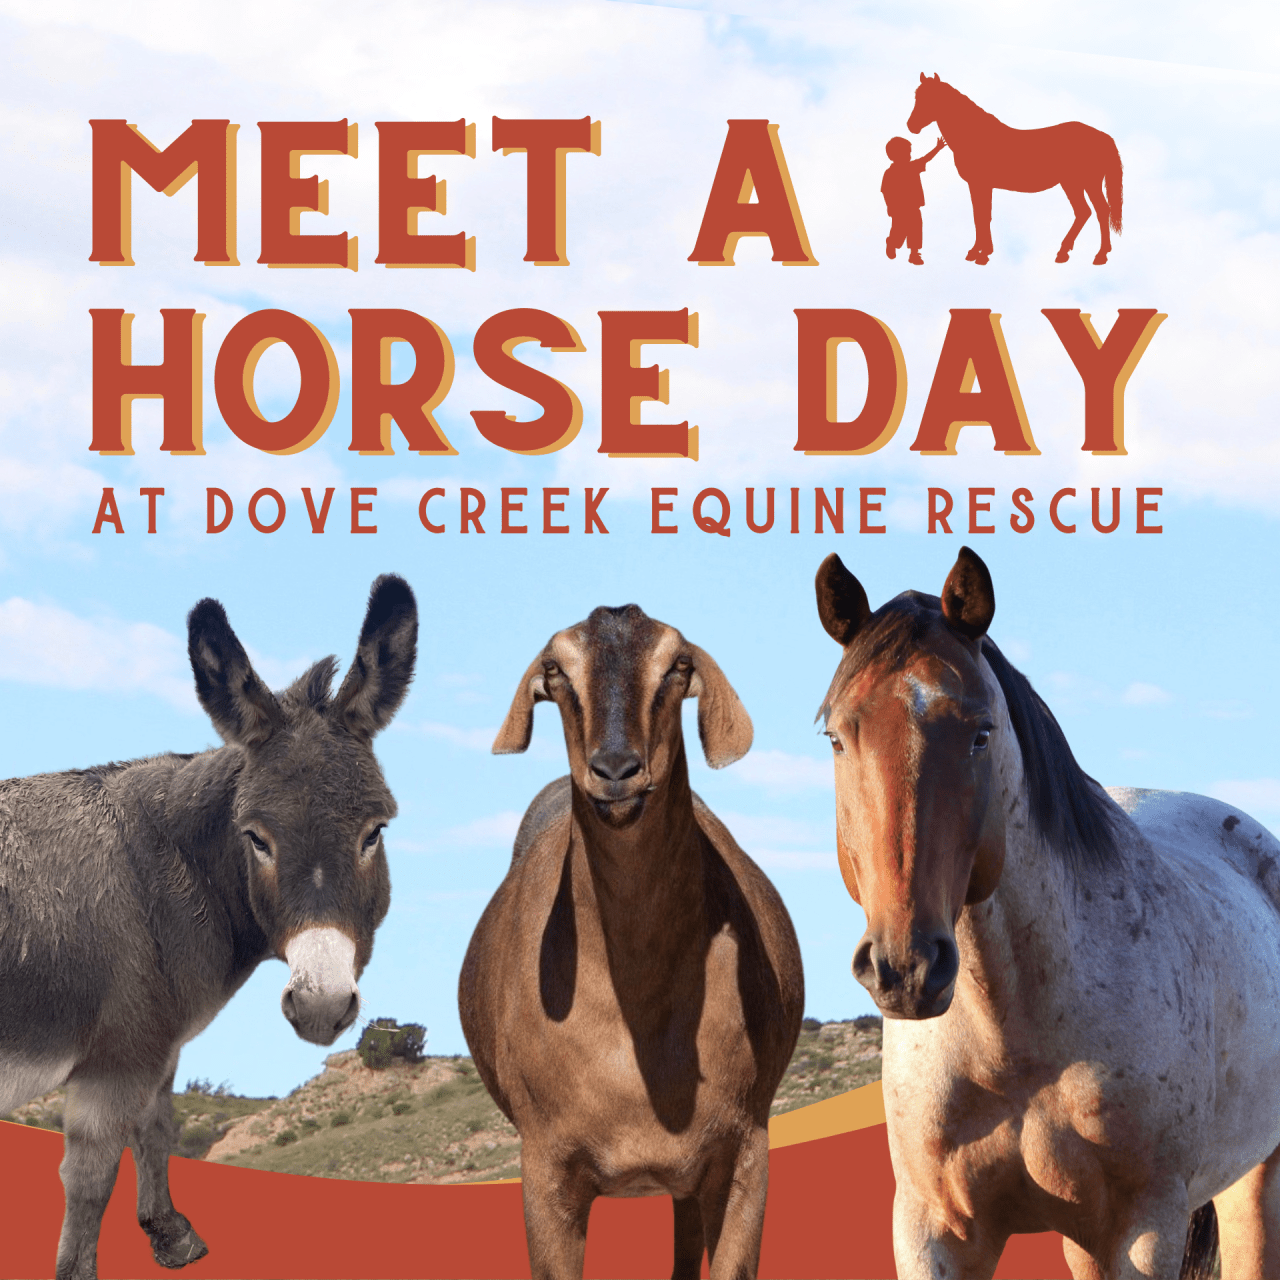 Dove Creek Equine Rescue ‘Meet a Horse’ day on May 18